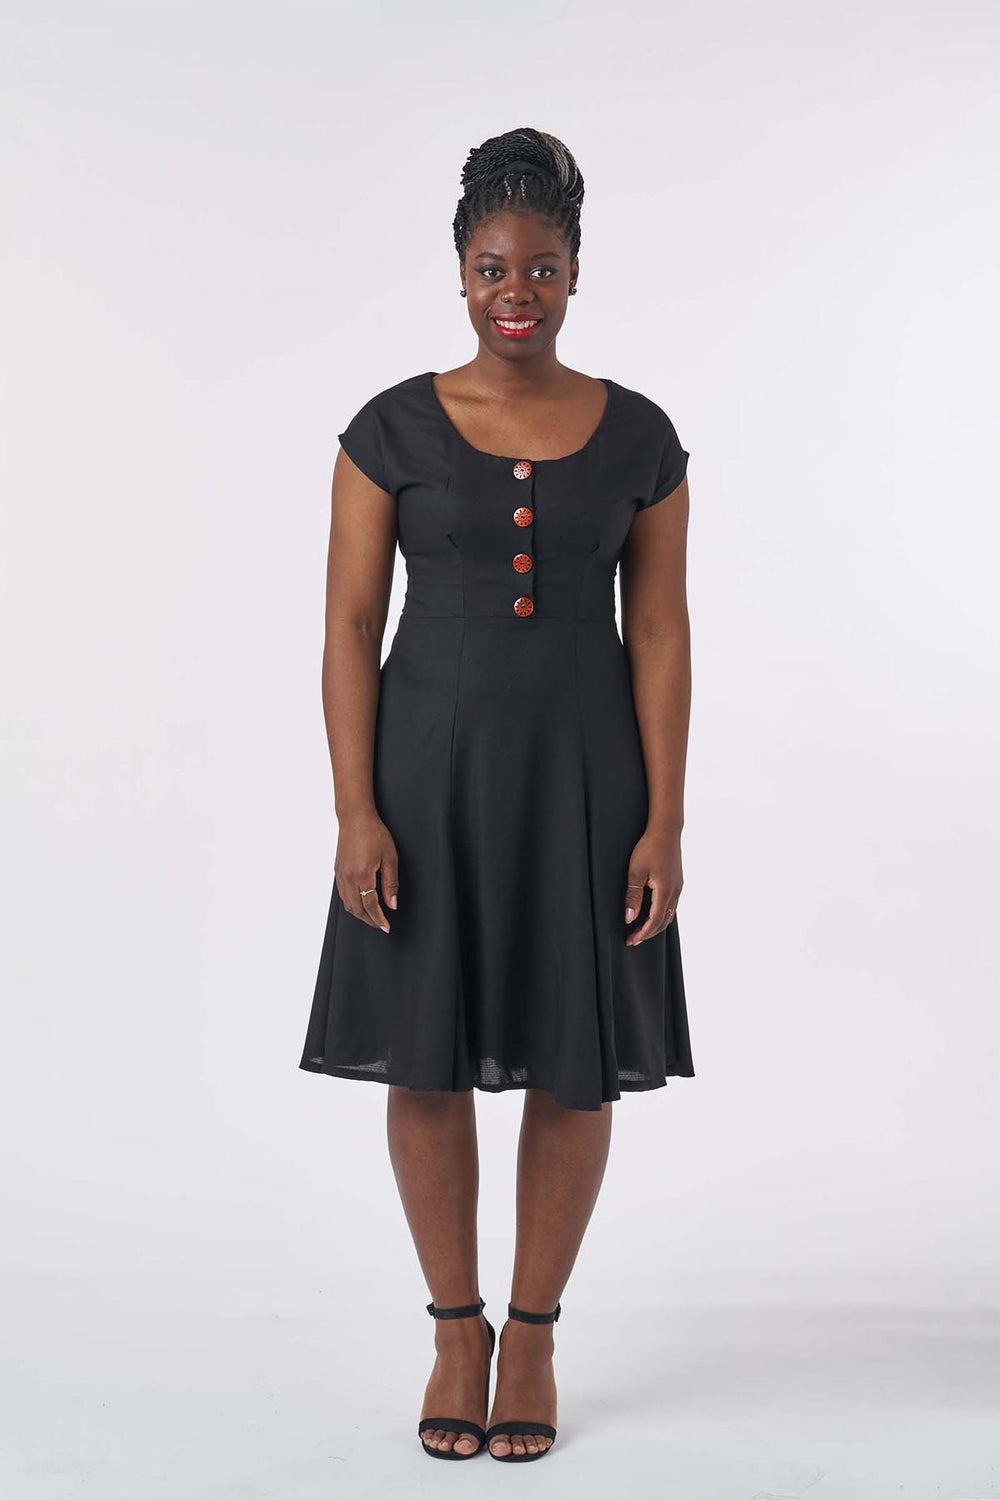 Woman wearing the Doris Dress sewing pattern from Sew Over It on The Fold Line. A knee length dress with a scoop neck and short grown-on sleeves.